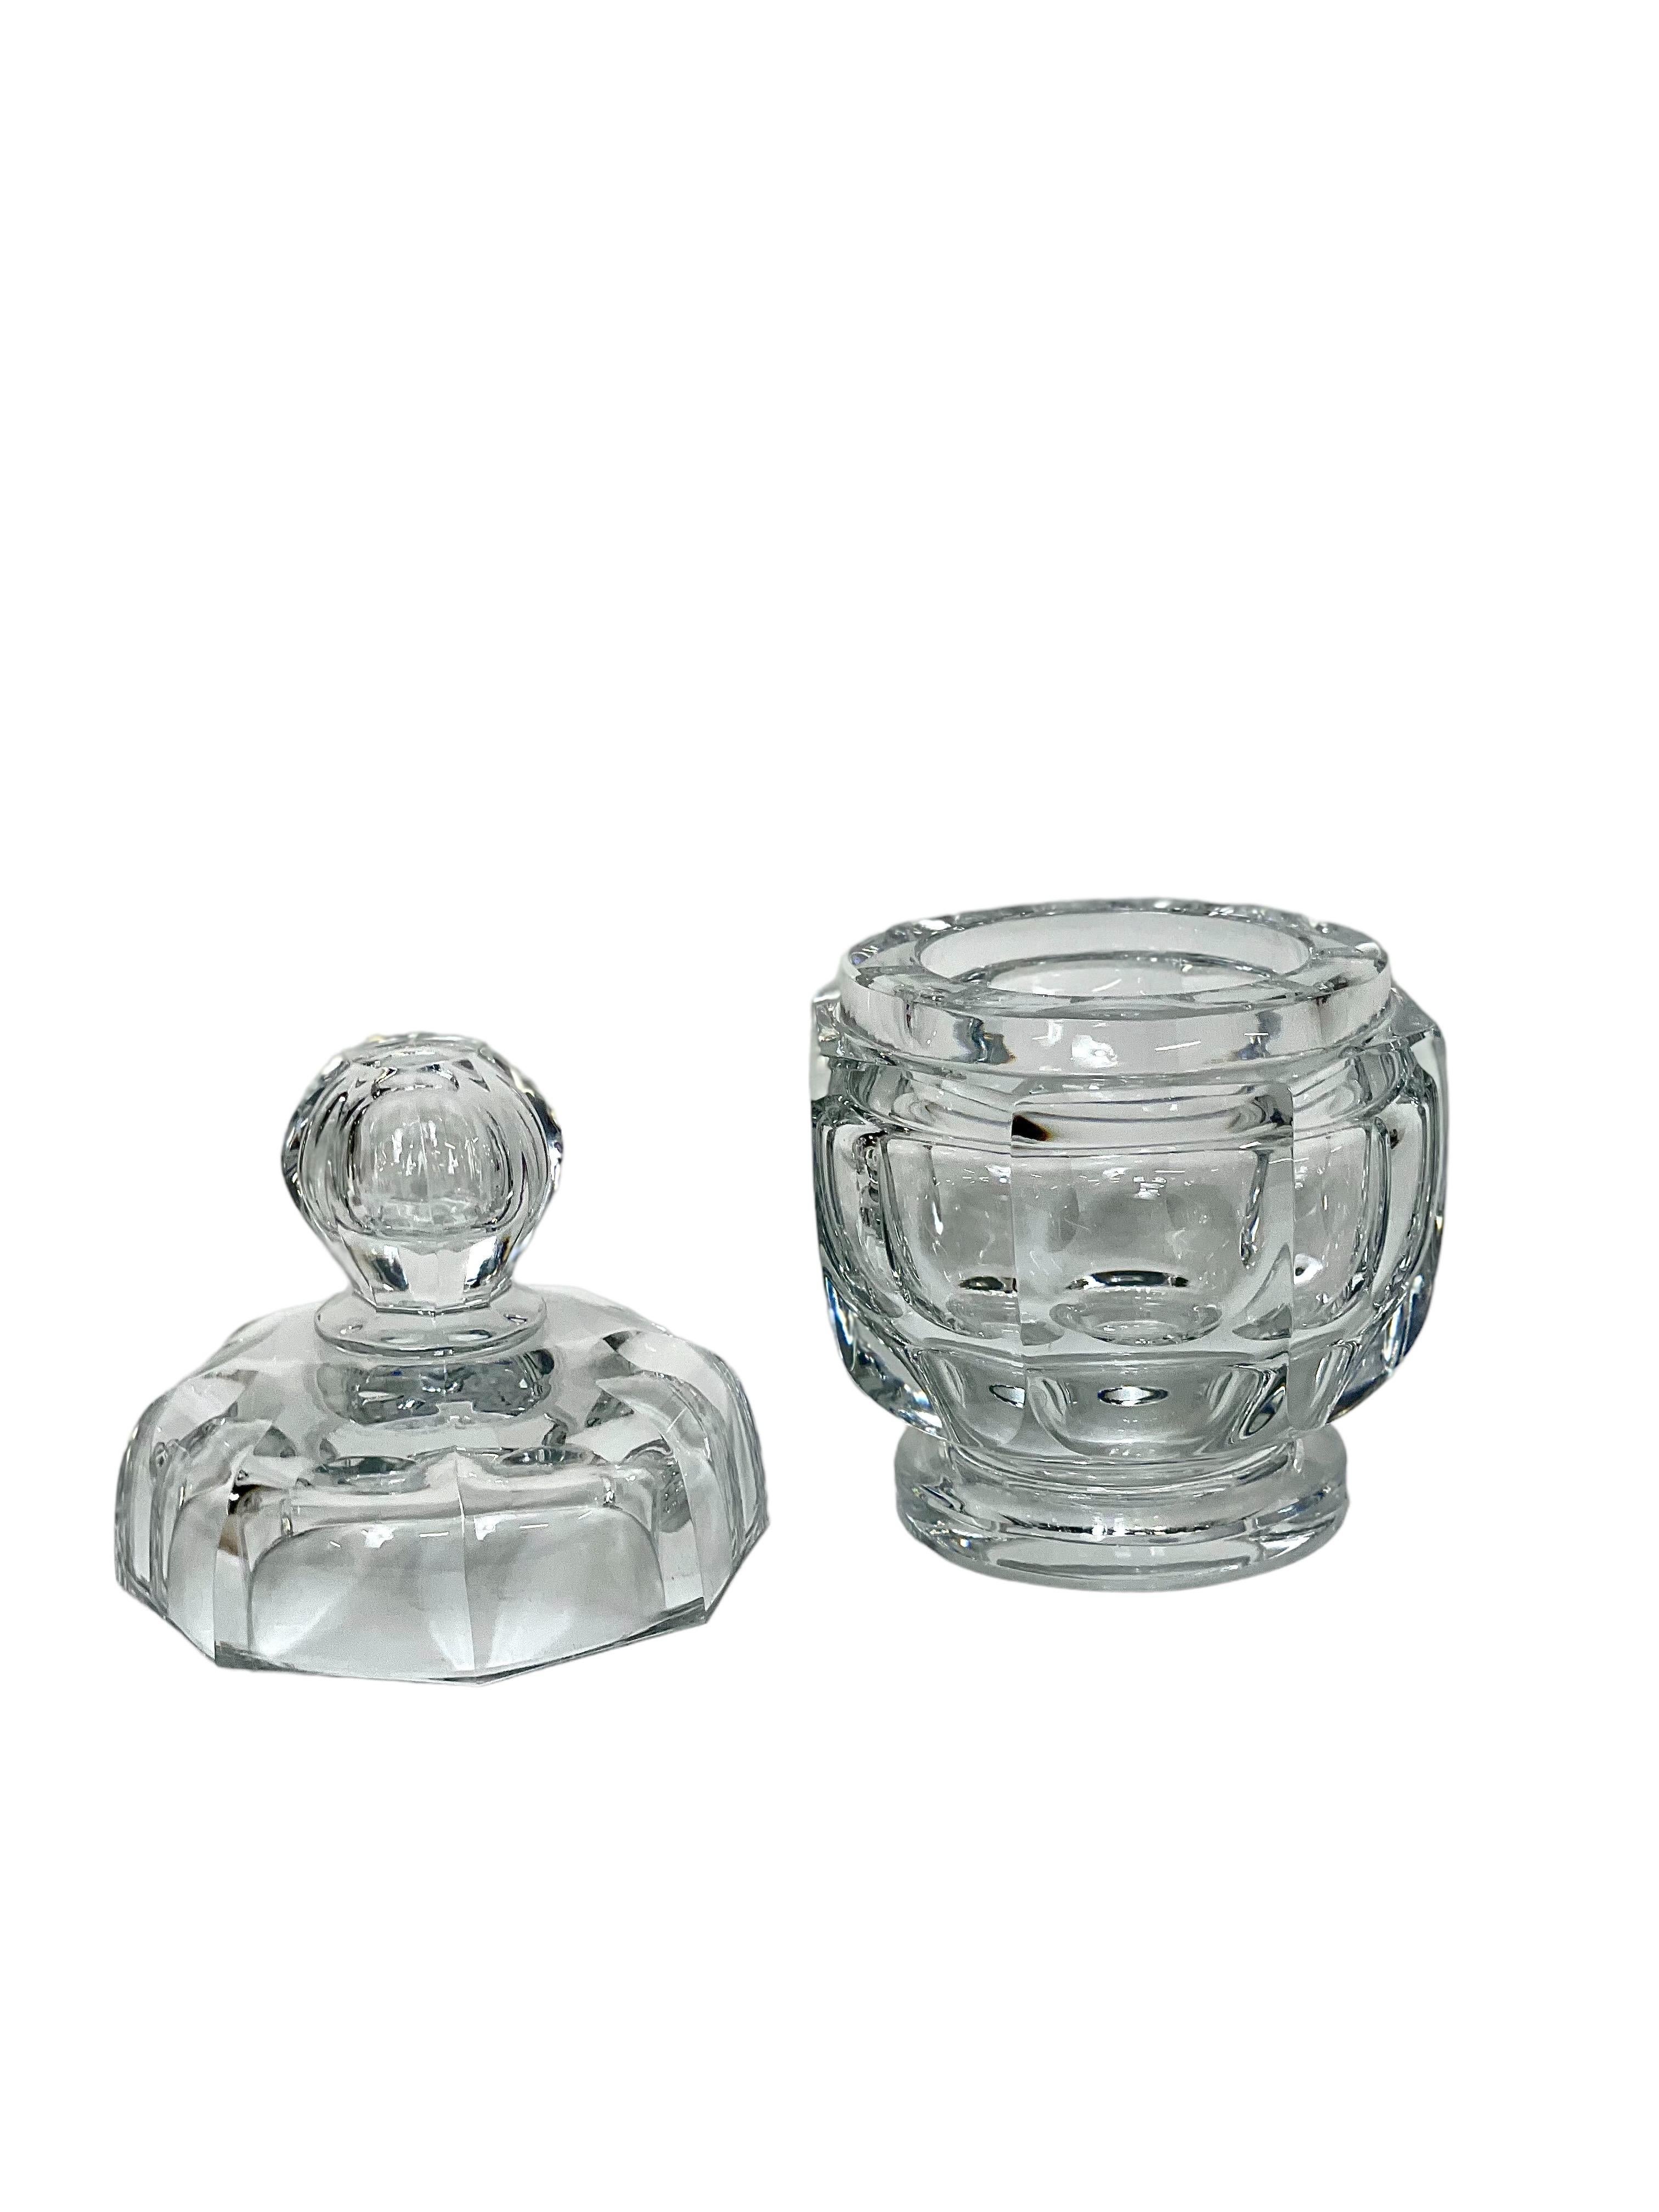 A charming 1940s Art Deco crystal lidded powder box, from the renowned glass manufacturer Baccarat, and originally used as a container for loose face powder, and perhaps a powder puff. This beautiful and substantial crystal, faceted jar, with its